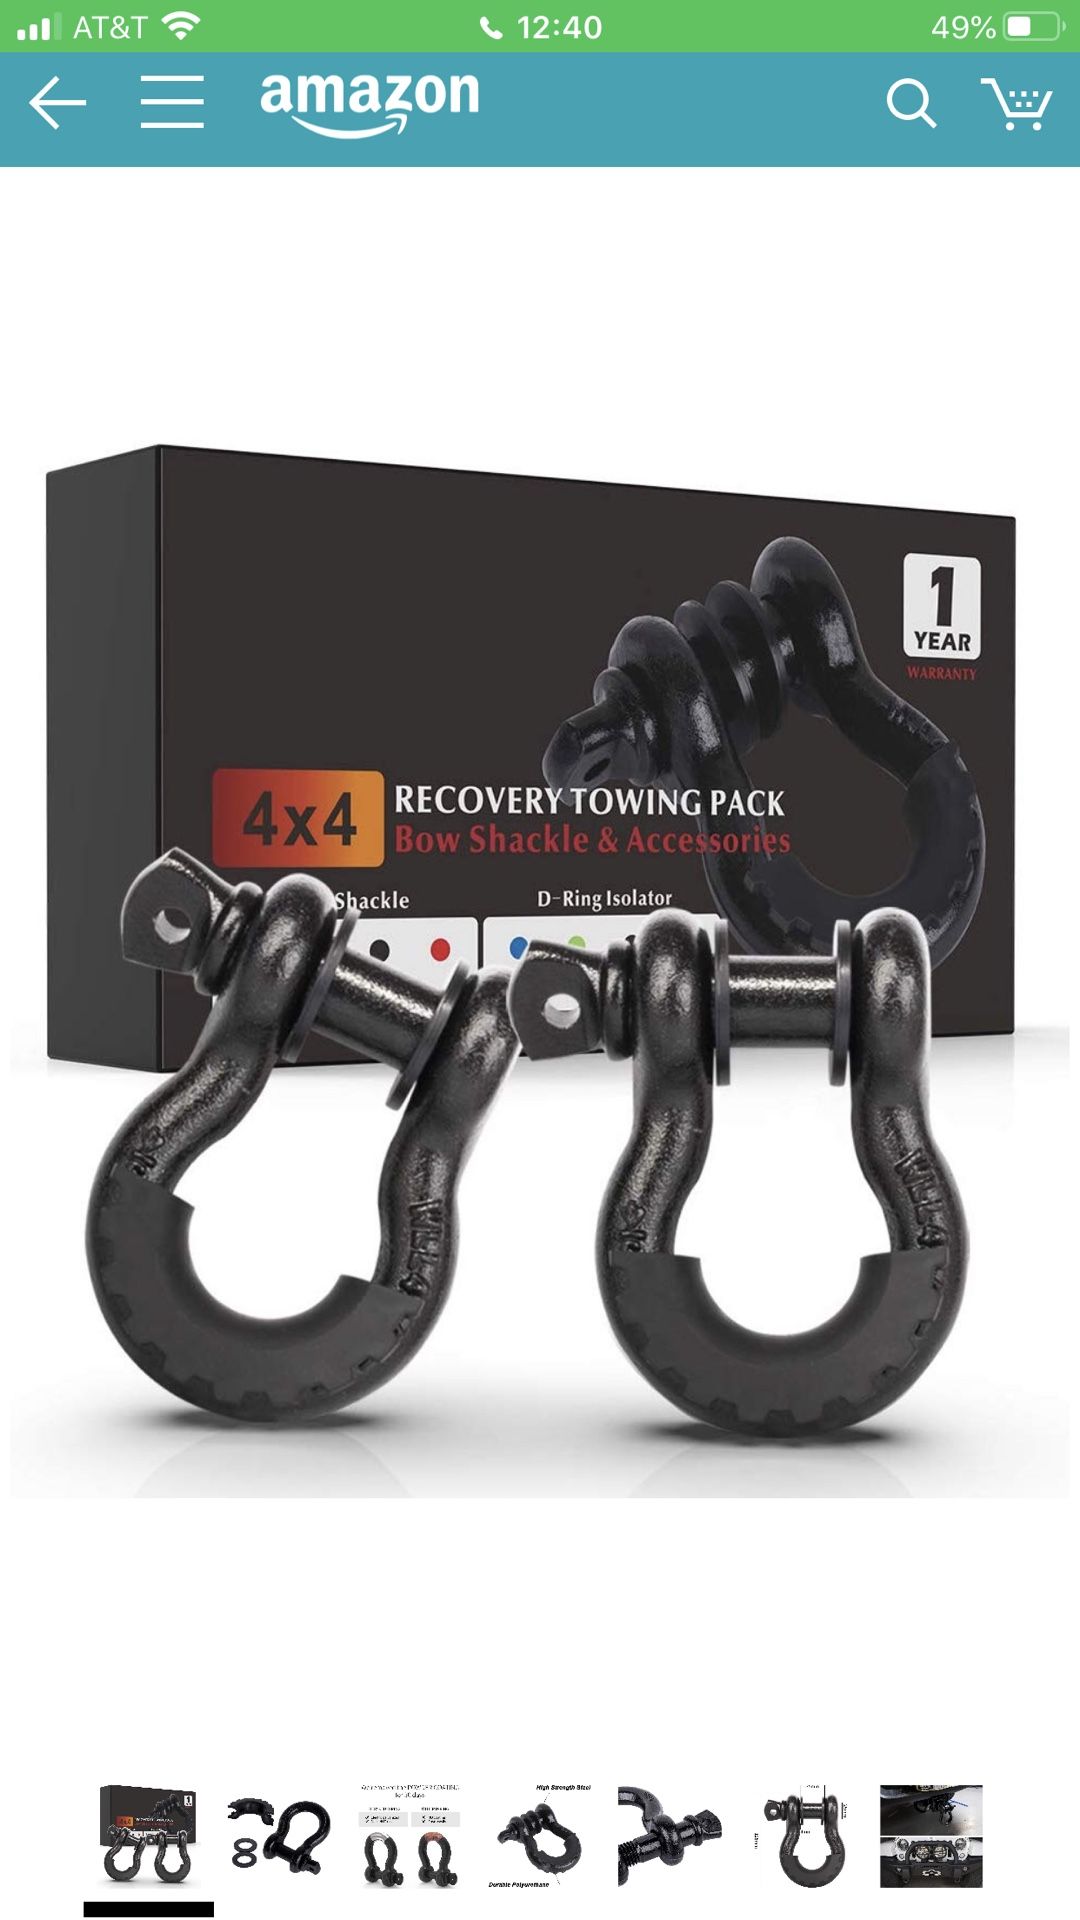 Fieryred 3/4” D ring shackle